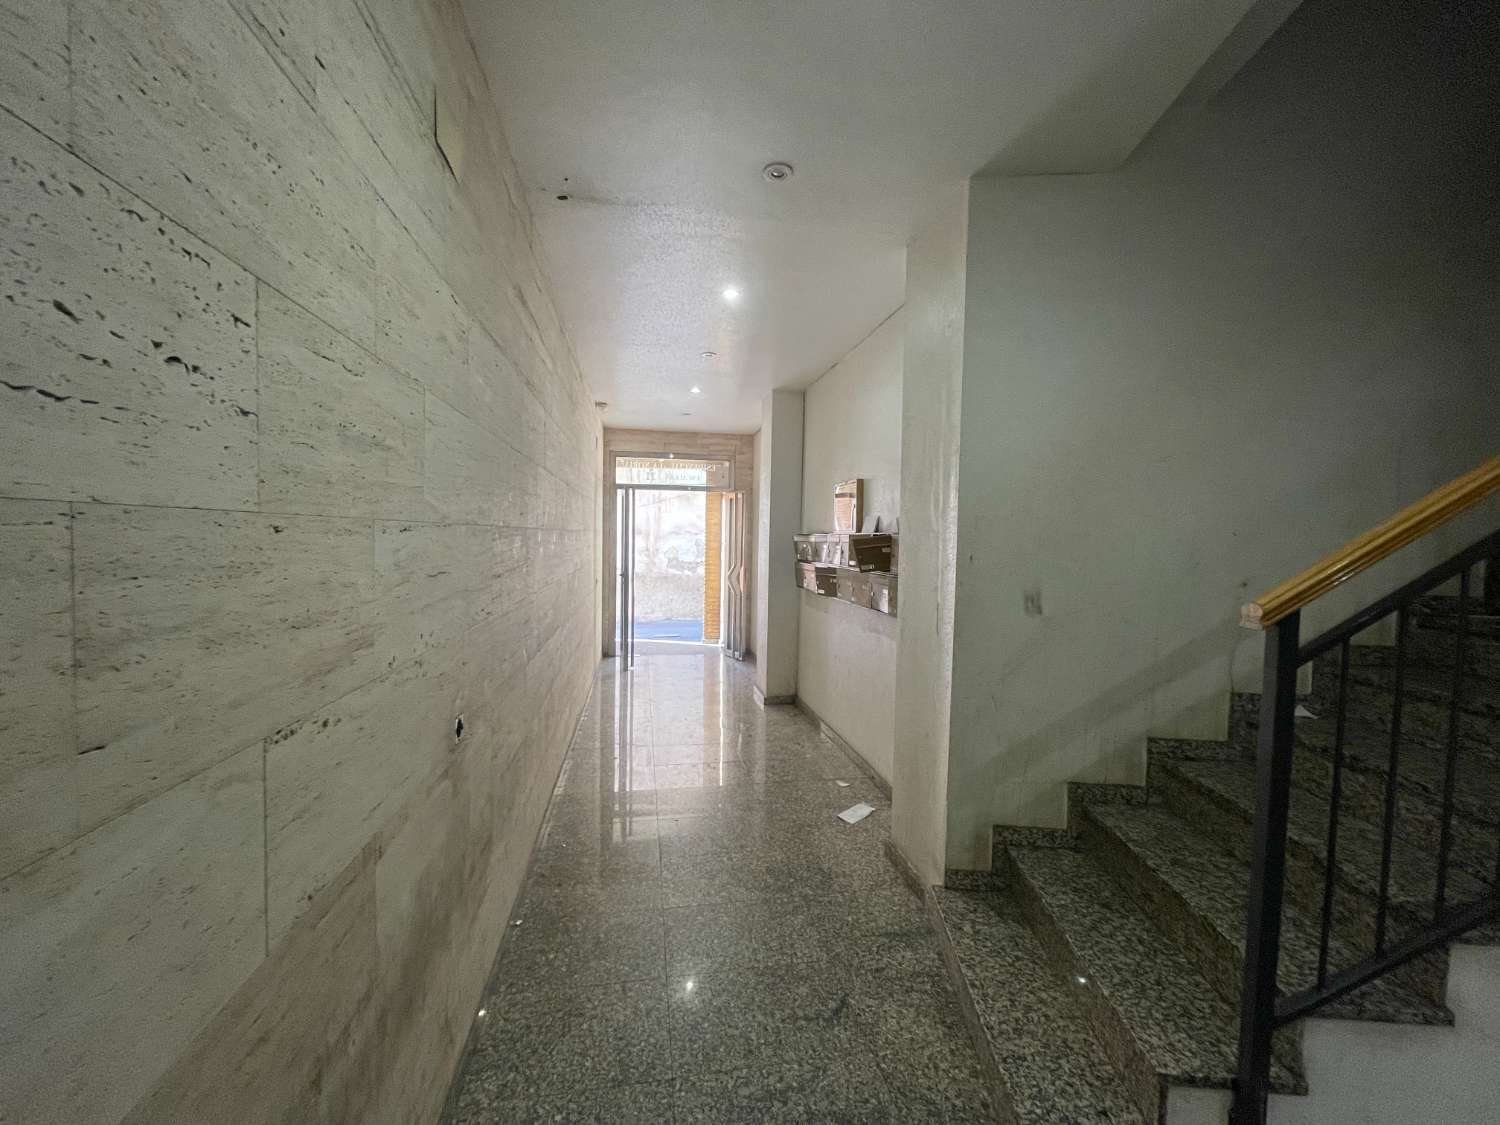 Flat for sale in Archena